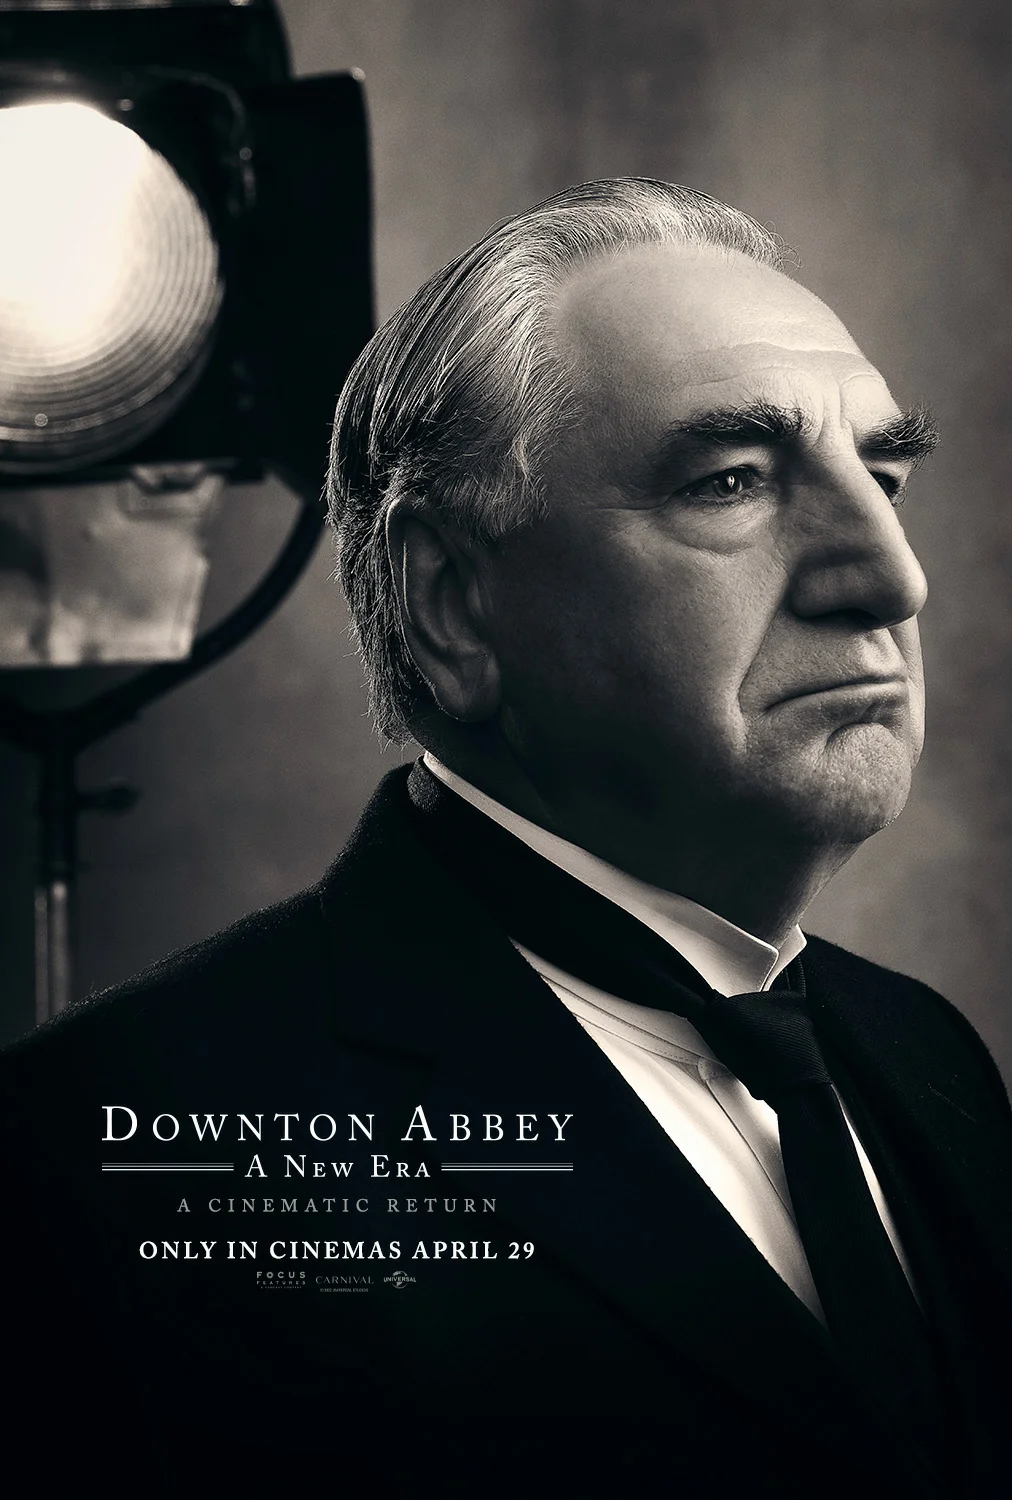 downton-abbey-a-new-era-released-character-posters-multiple-main-actors-appear-11